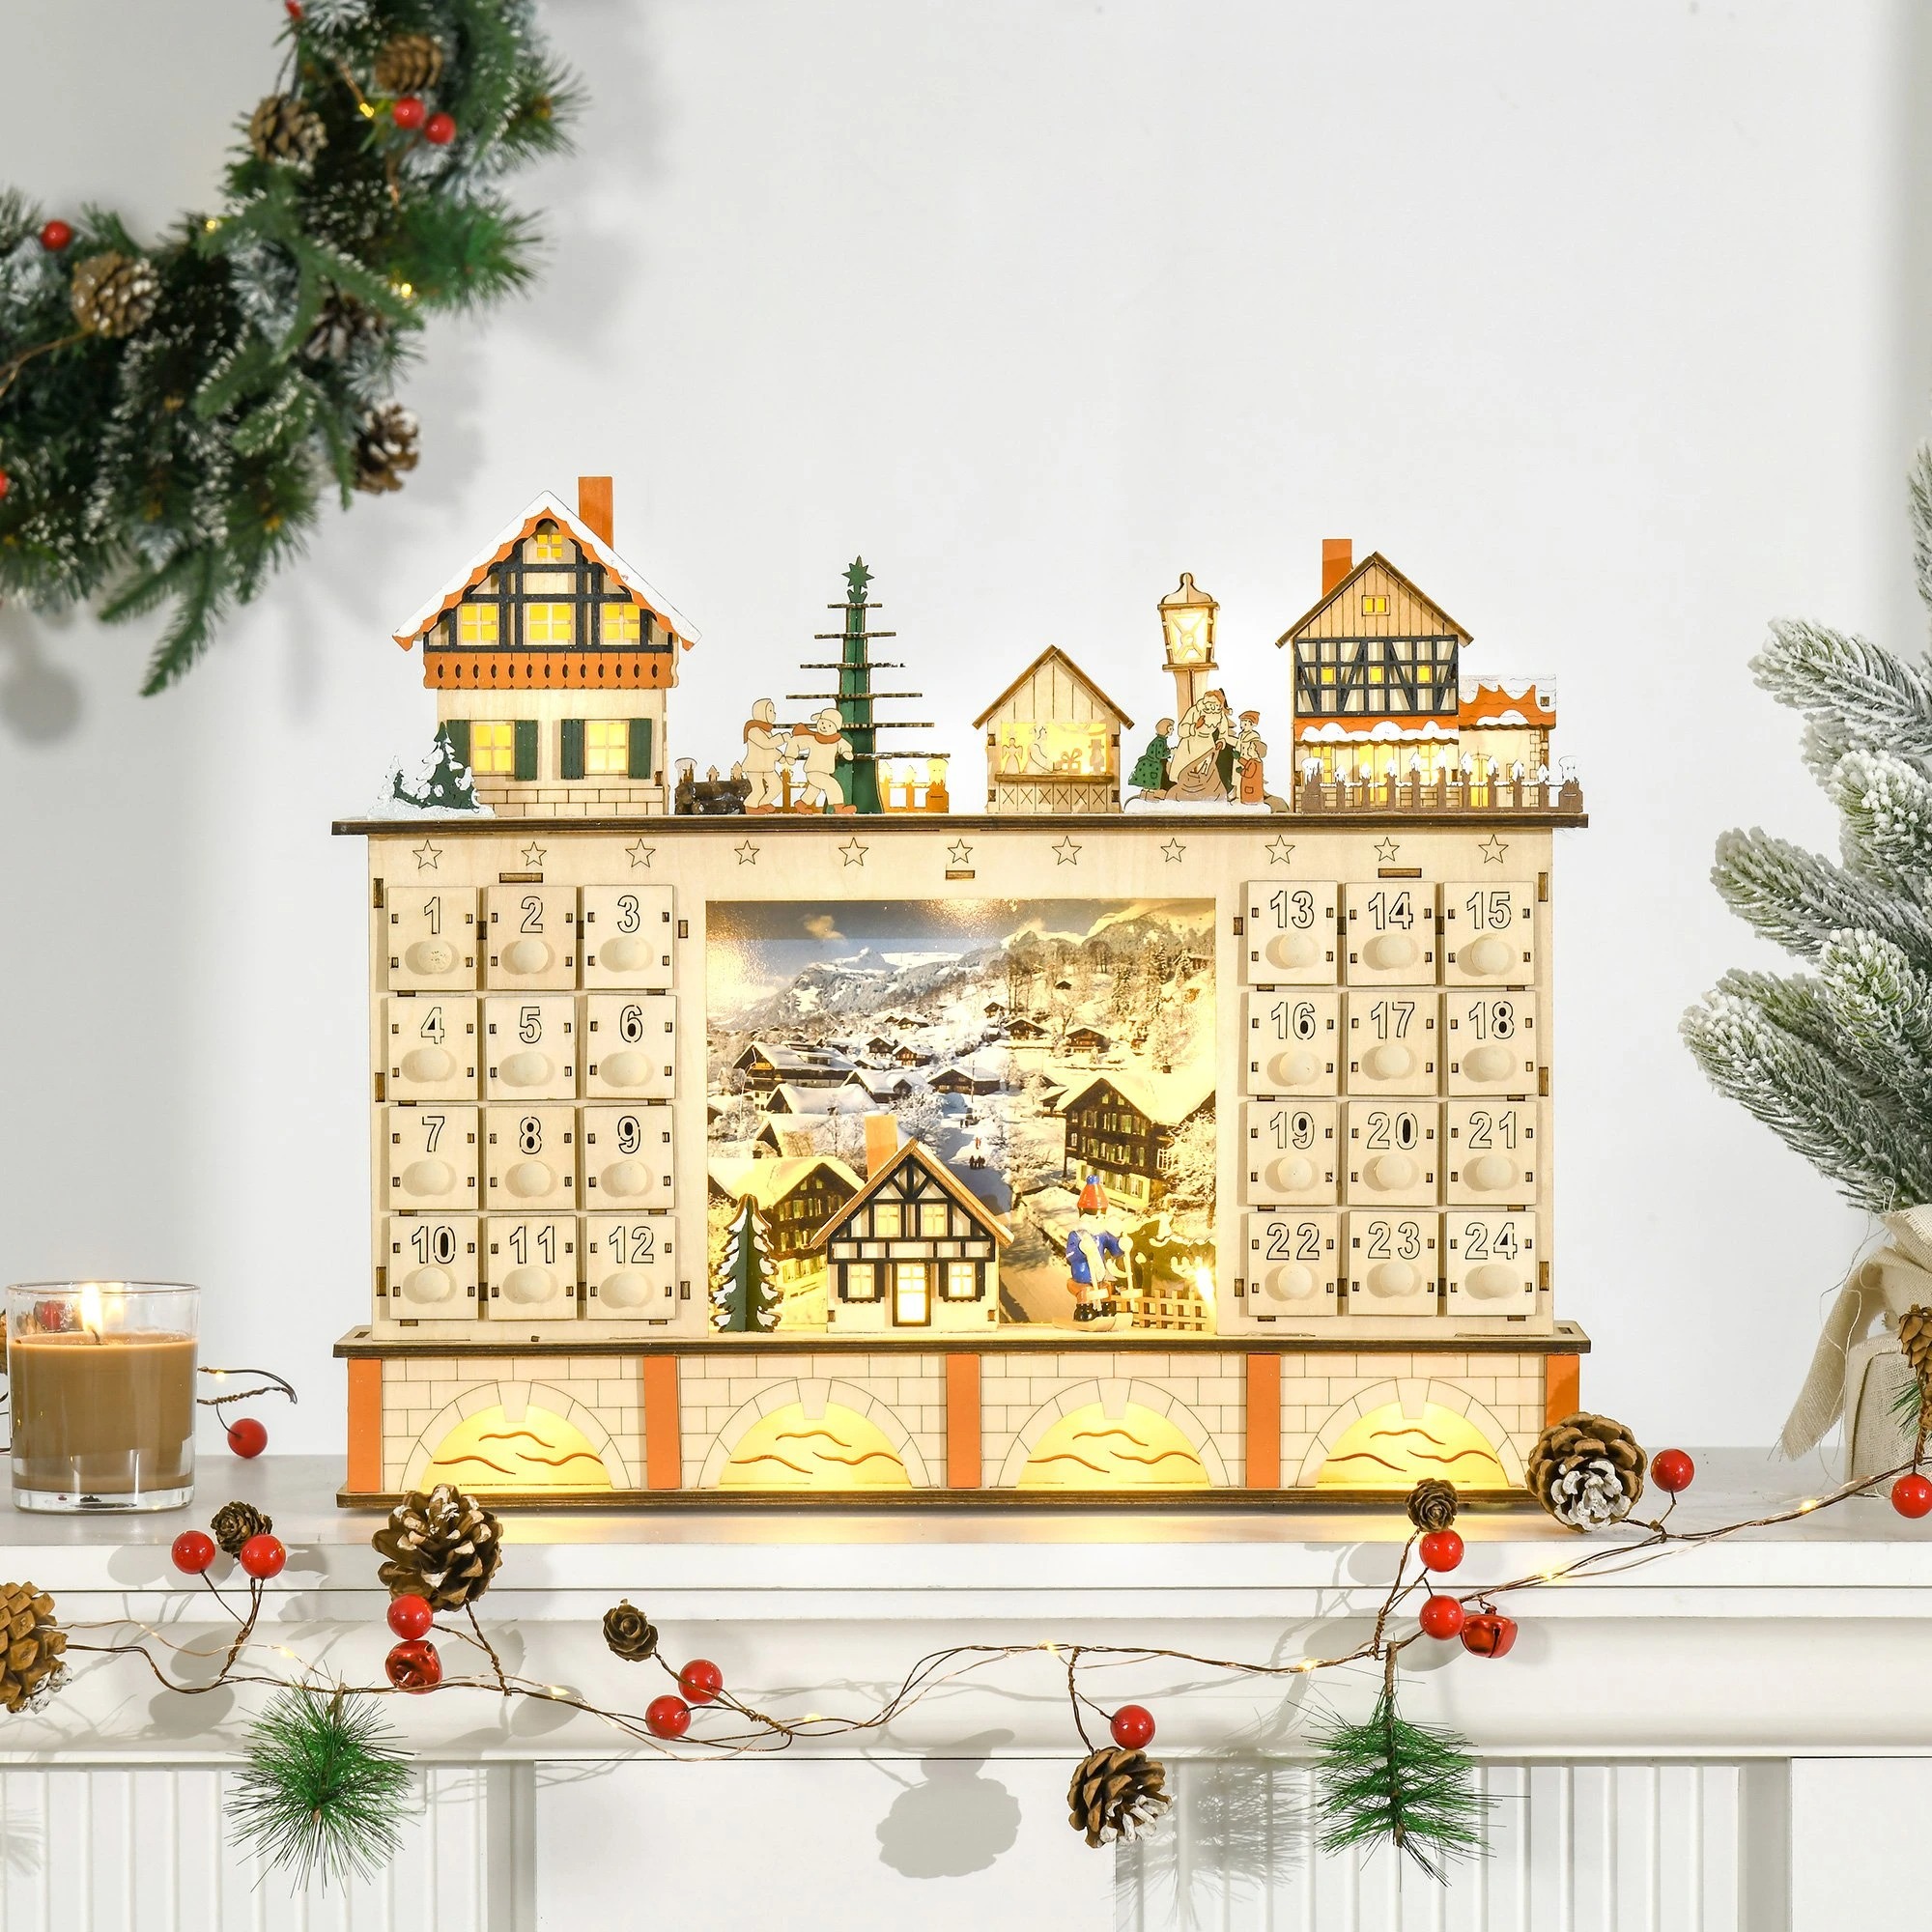 Decorate your table for the holidays with this Christmas advent calendar from HOMCOM, which is great for decoration. Put notes and candies in those drawers, and allow kids to open one drawer for each day. They will enjoy holiday cheer and surprises every 